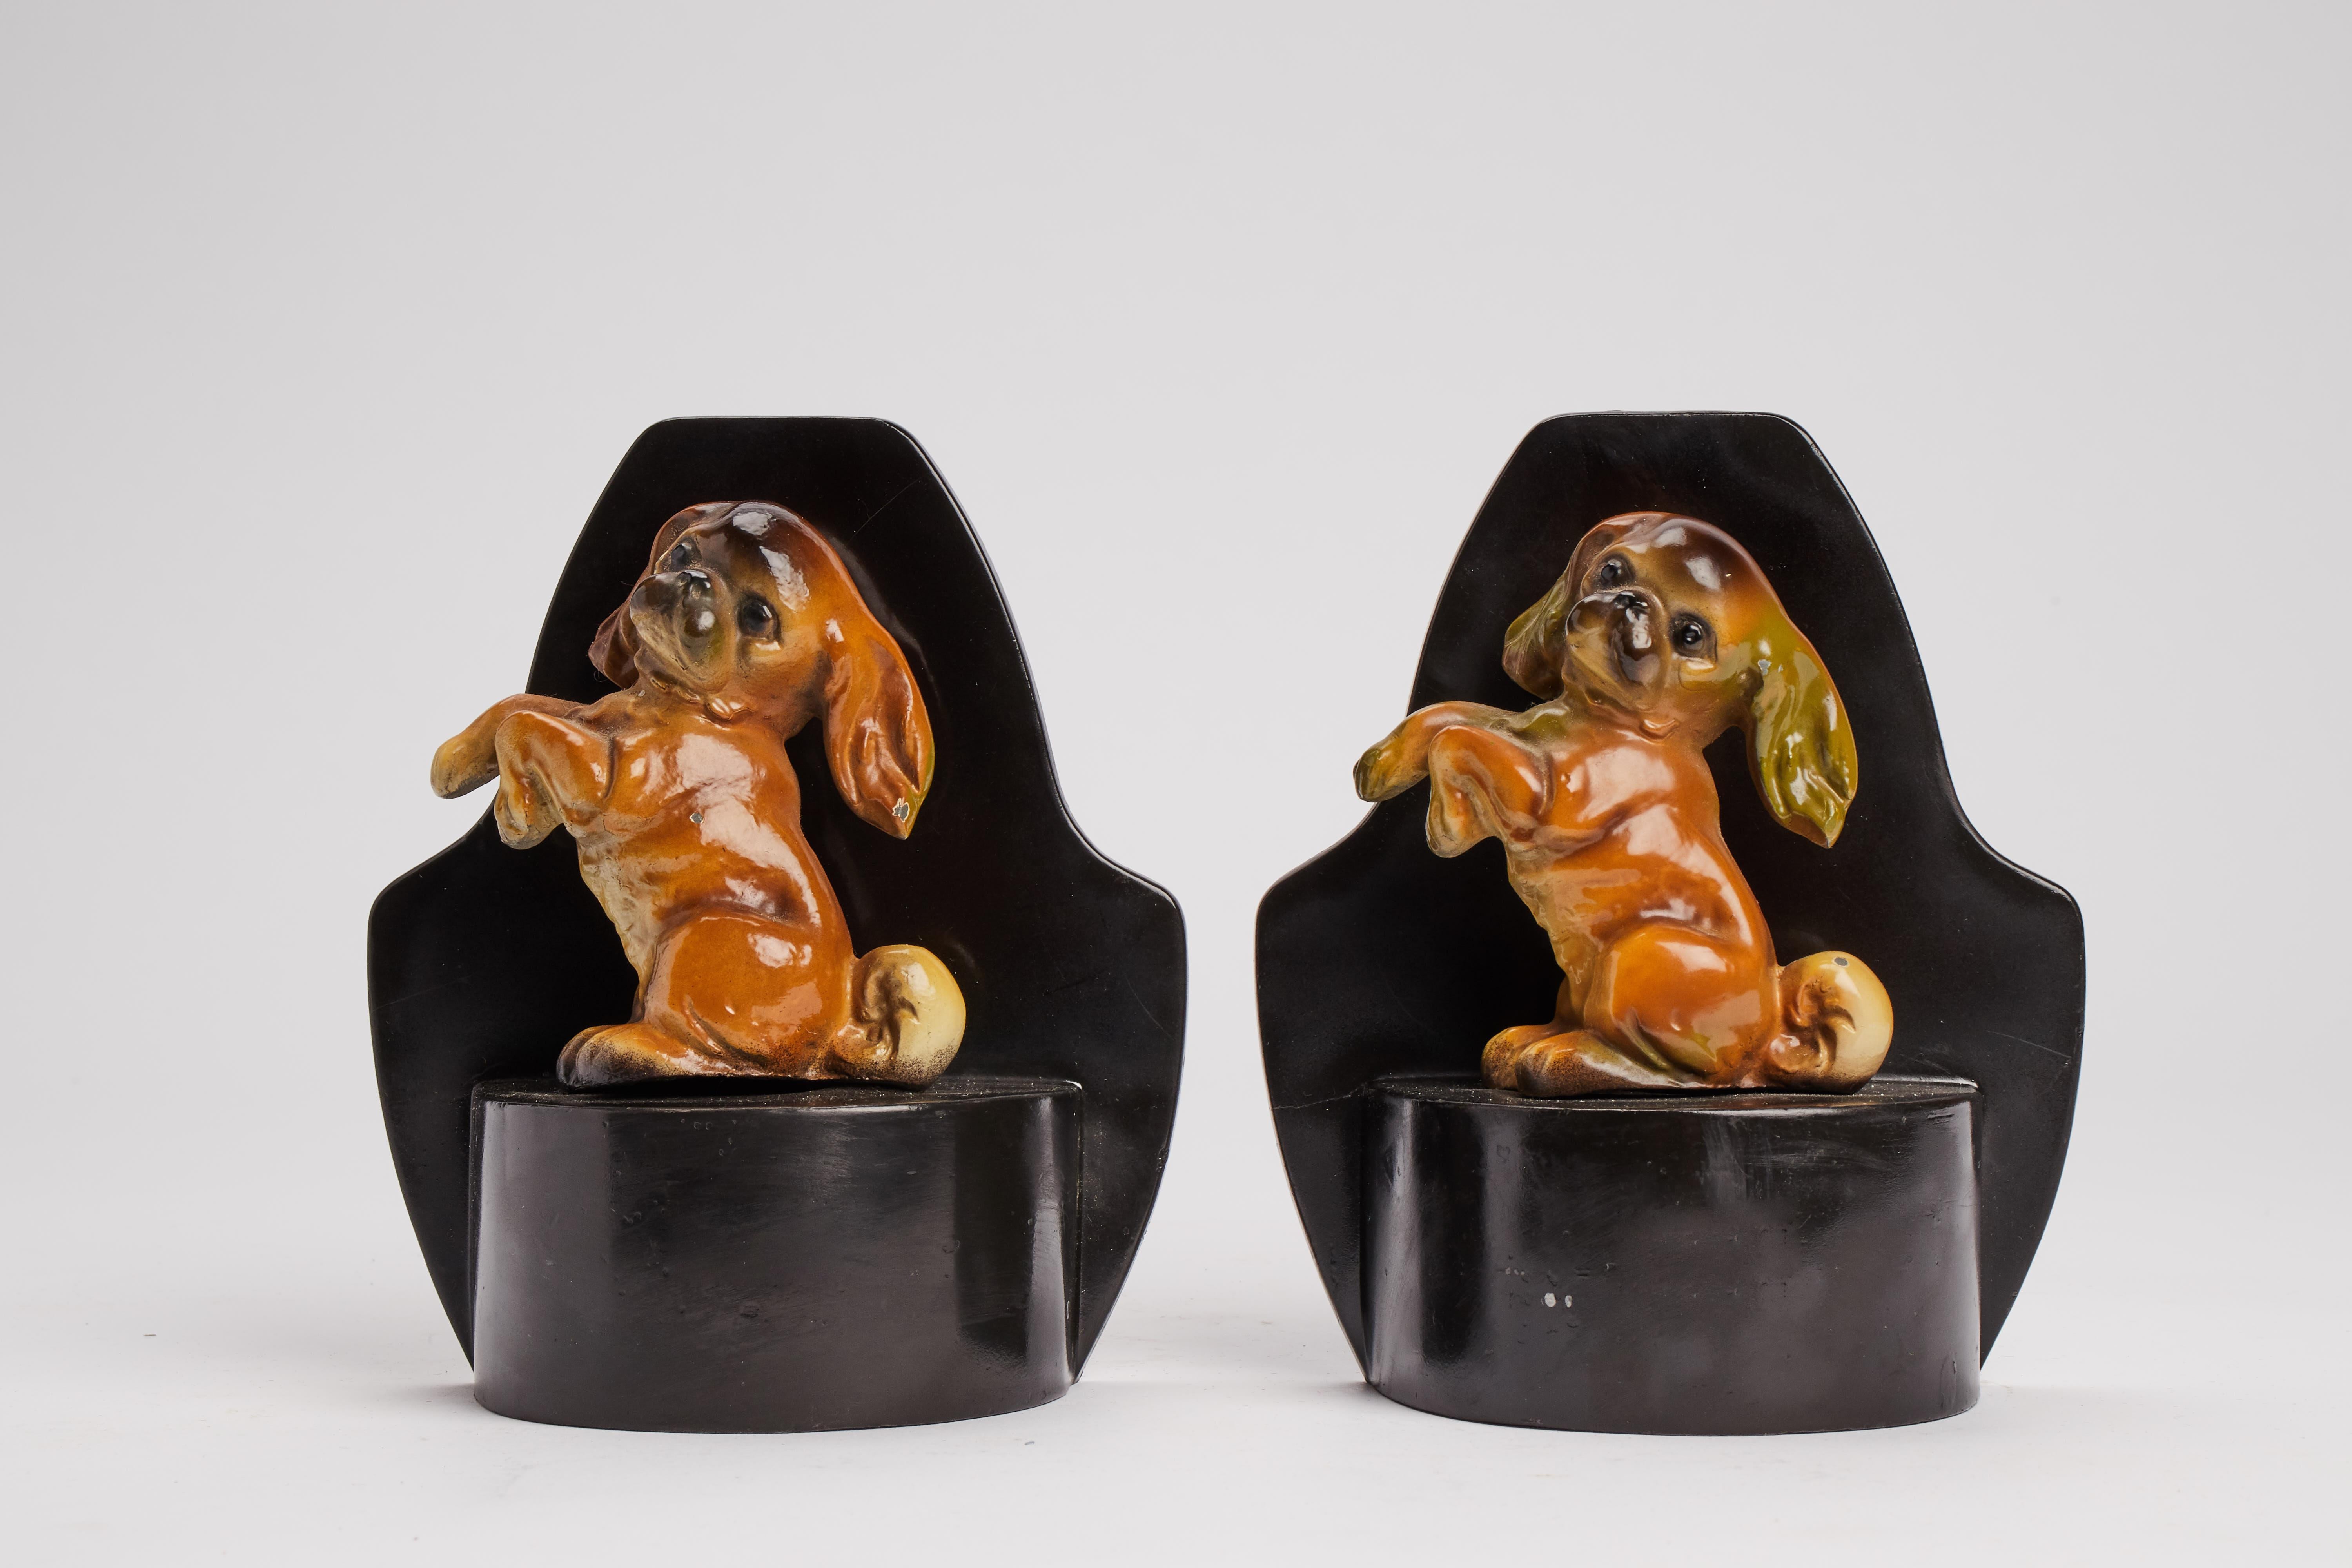 Pair of enameled metal bookends dipicting a Pekingese dog breed. France circa 1915.